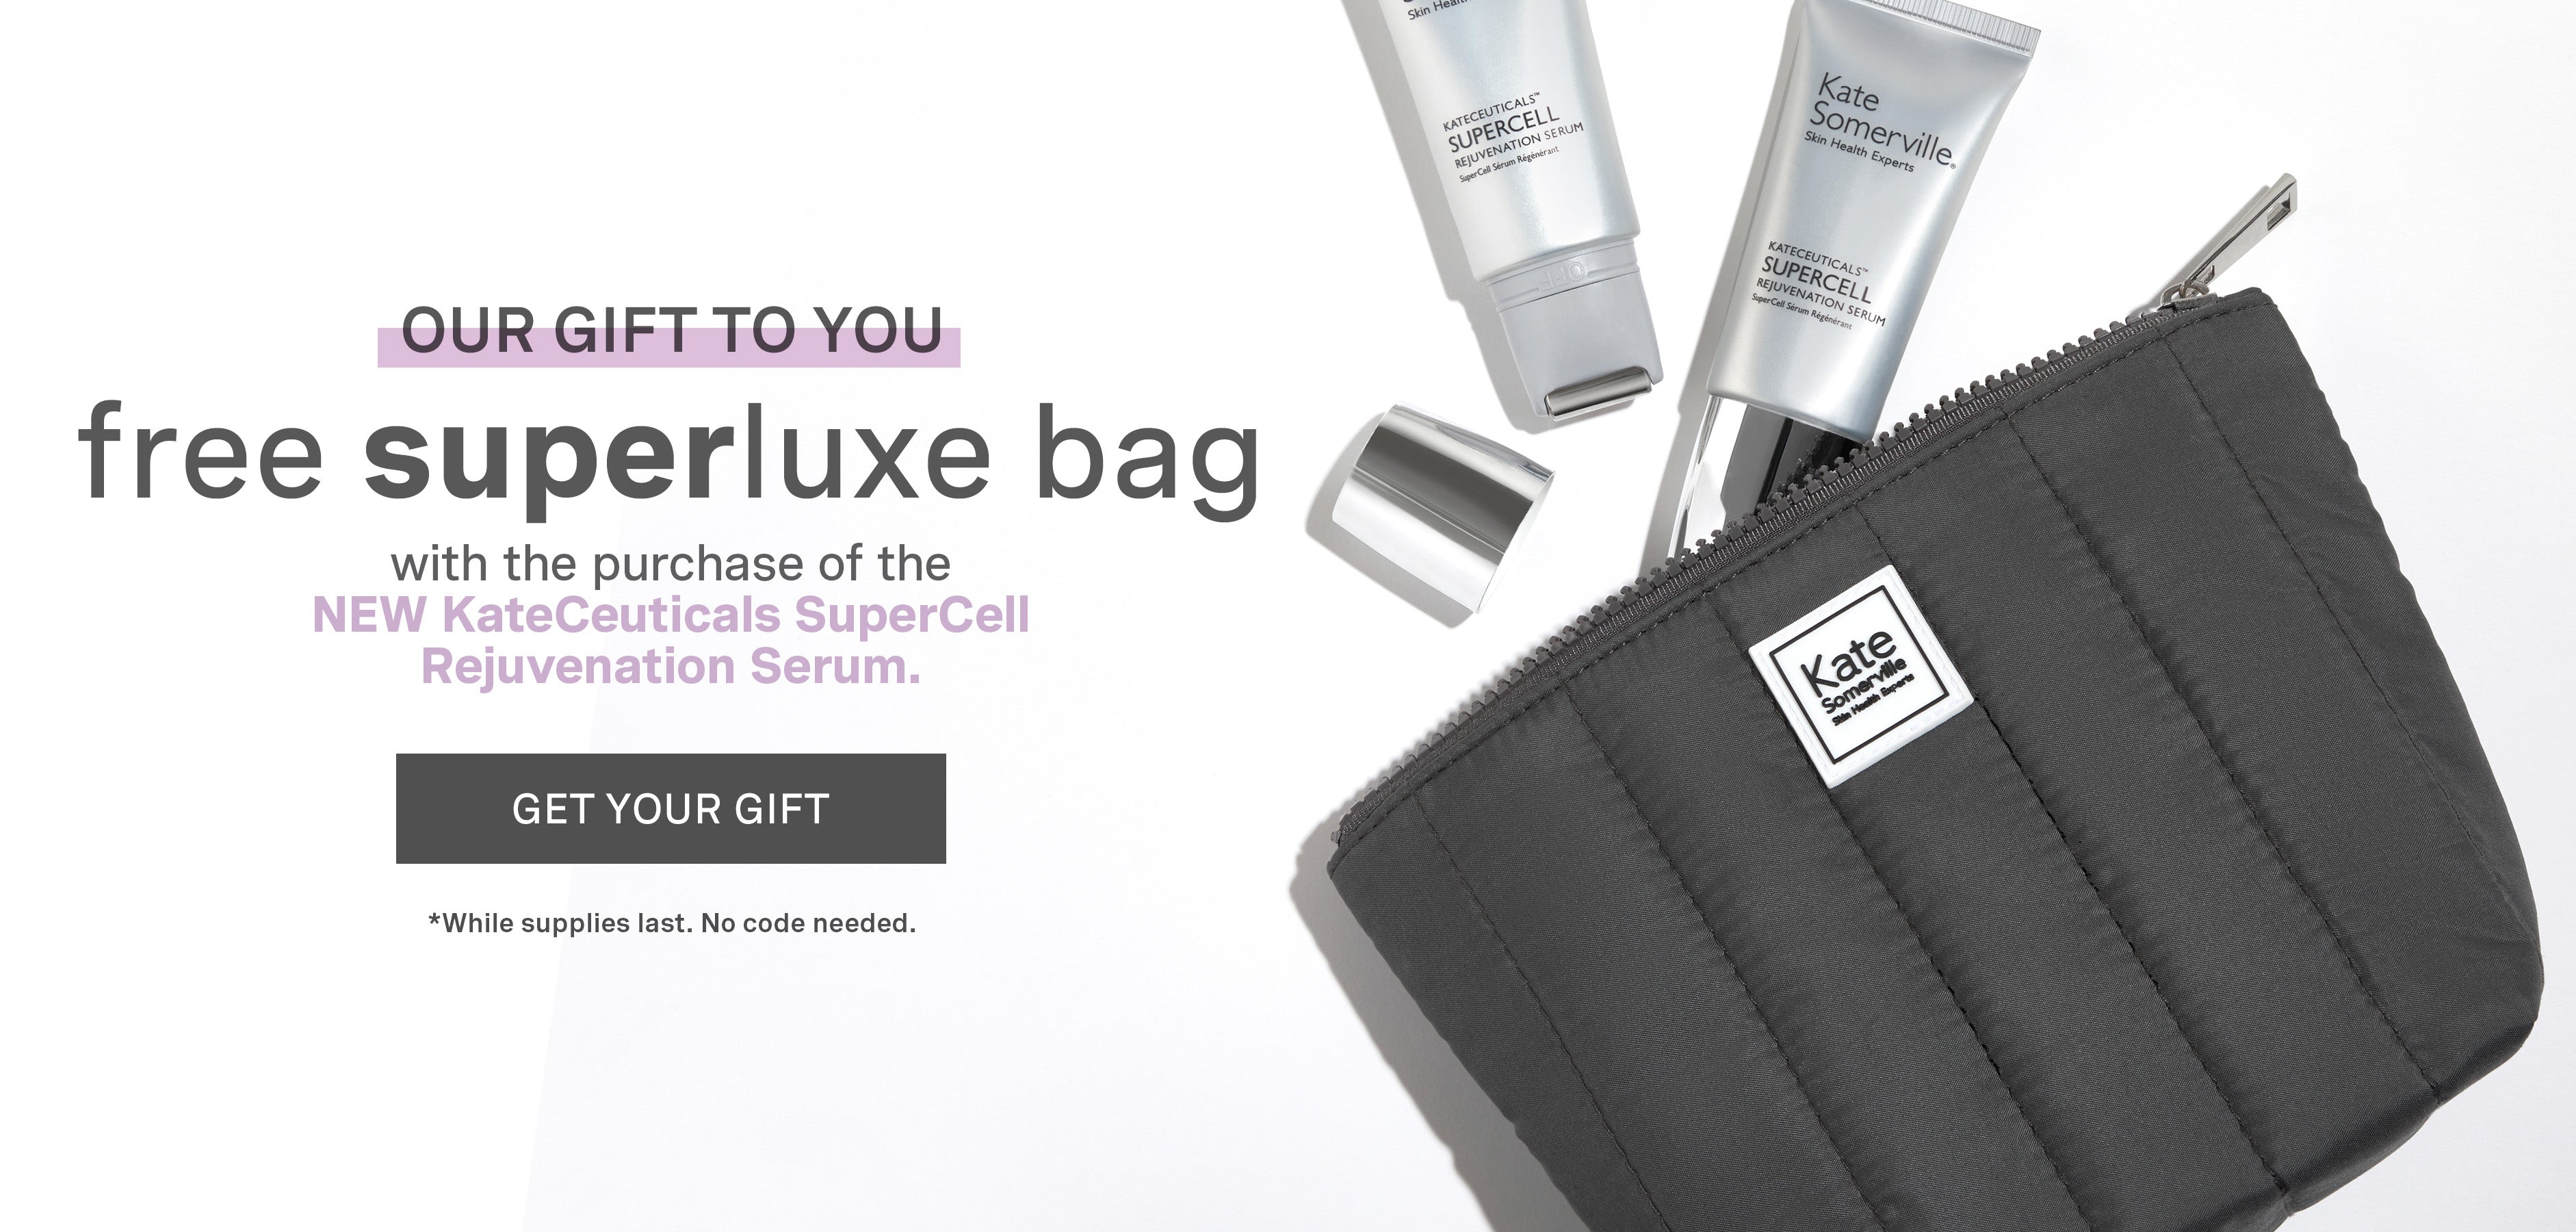 our gift to you. free superluxe bag with the purchase of the new kateceuticals supercell rejuvenation serum. GET YOUR GIFT. *while supplies last. no code needed.